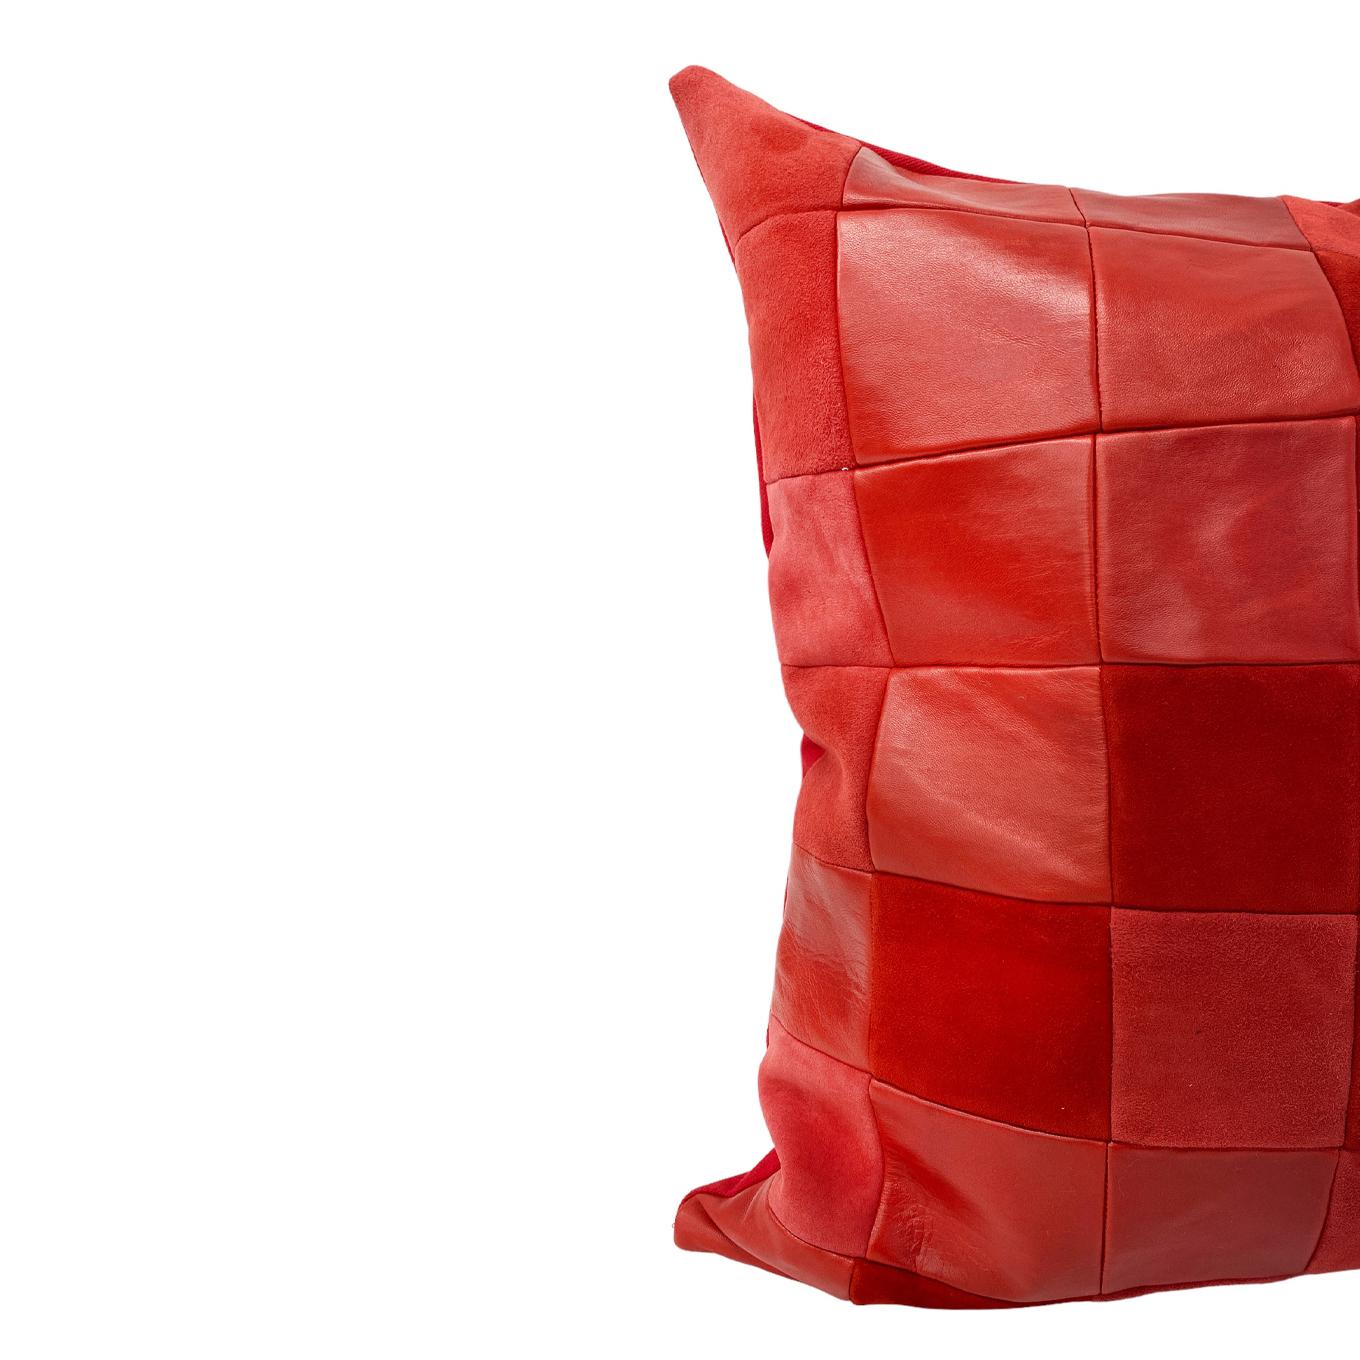 American Red Leather Home Decorative  Throw Pillow